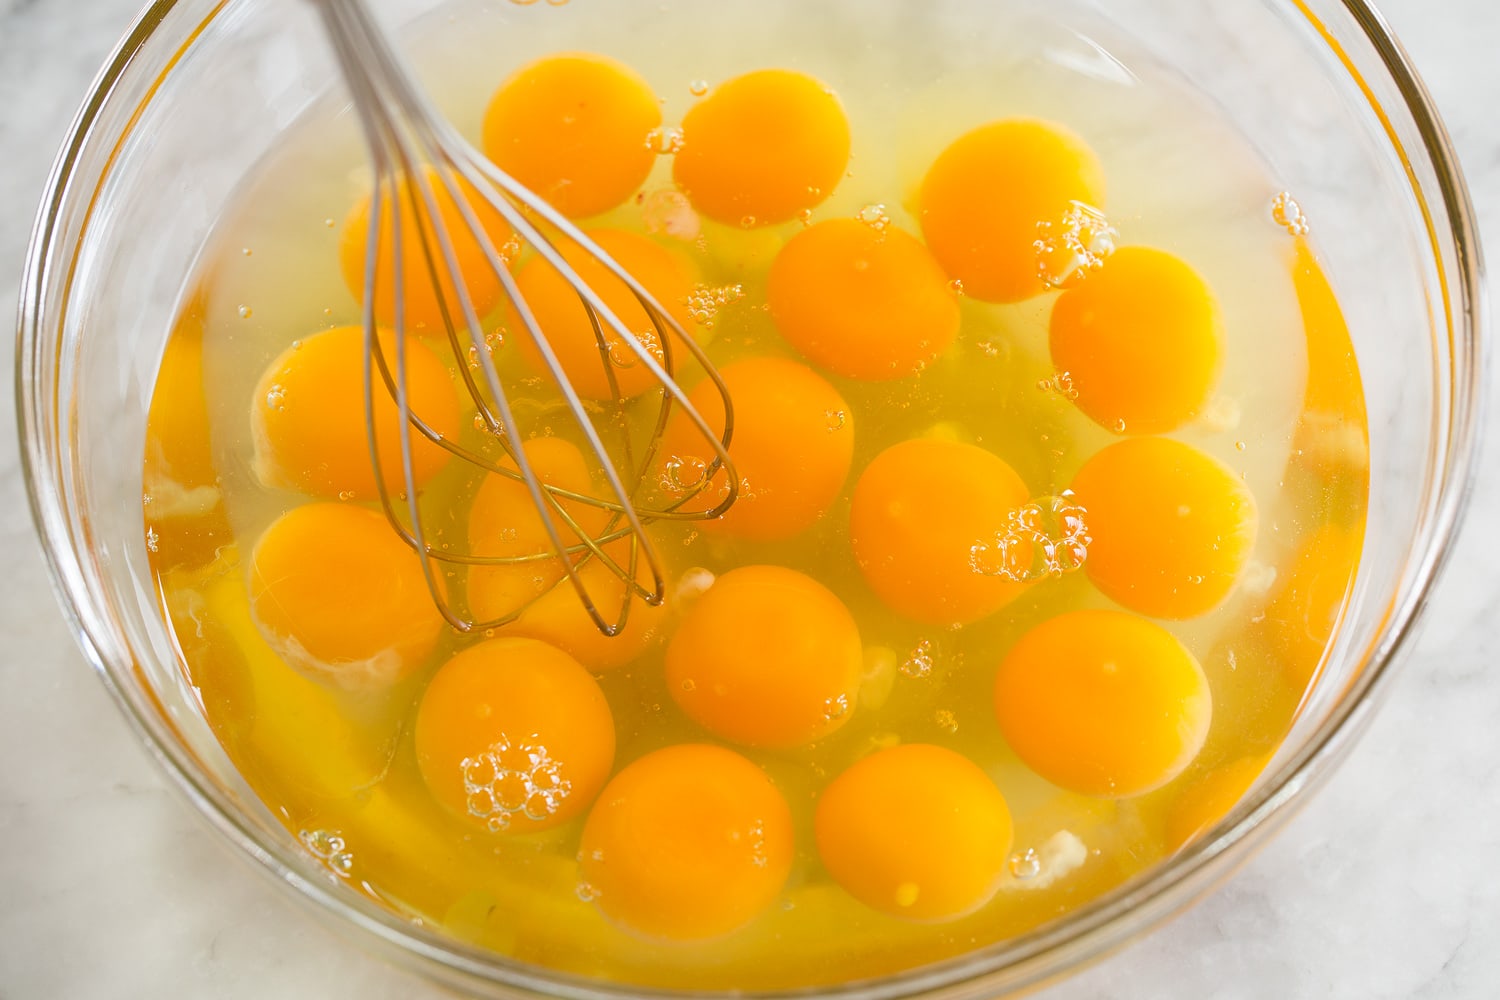 18 eggs in a glass mixing bowl being whisked together.